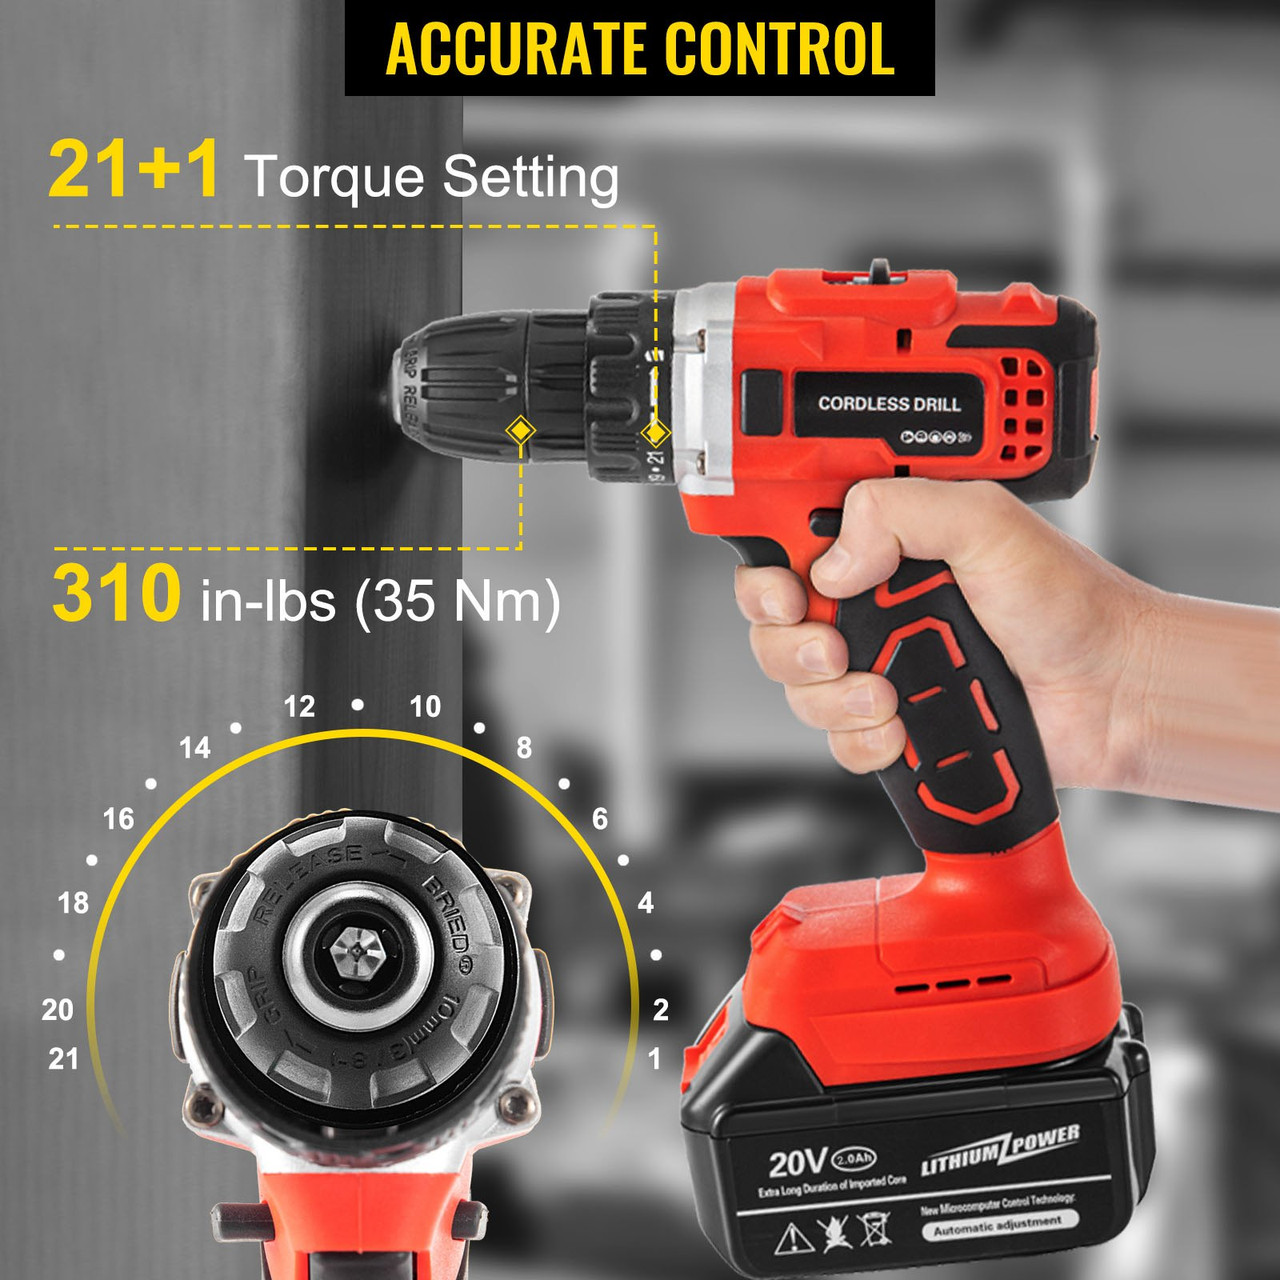 Cordless Drill Set, 20V Electric Power Brushless Drill with 2